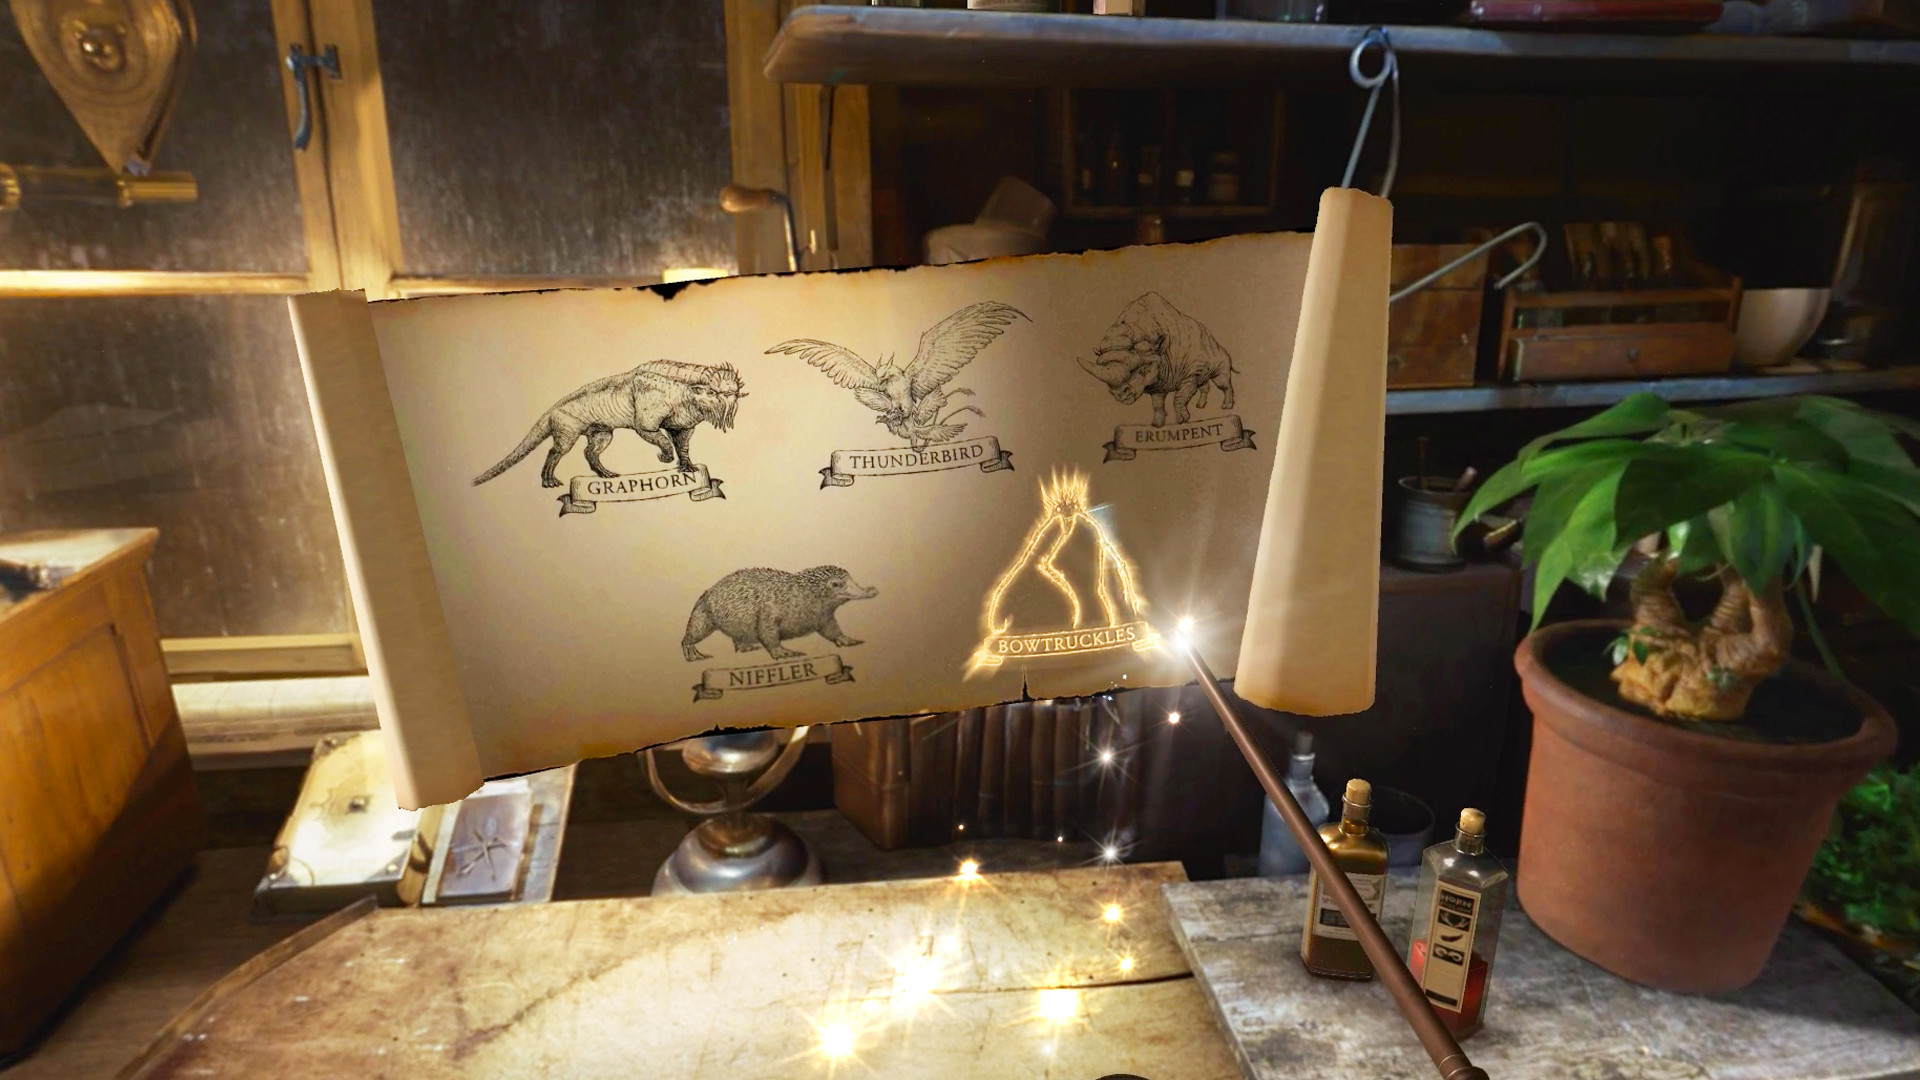 Fantastic-Beasts-and-Where-to-Find-Them-Oculus-Rift-HTC-Vive-SteamVR-Gear-VR